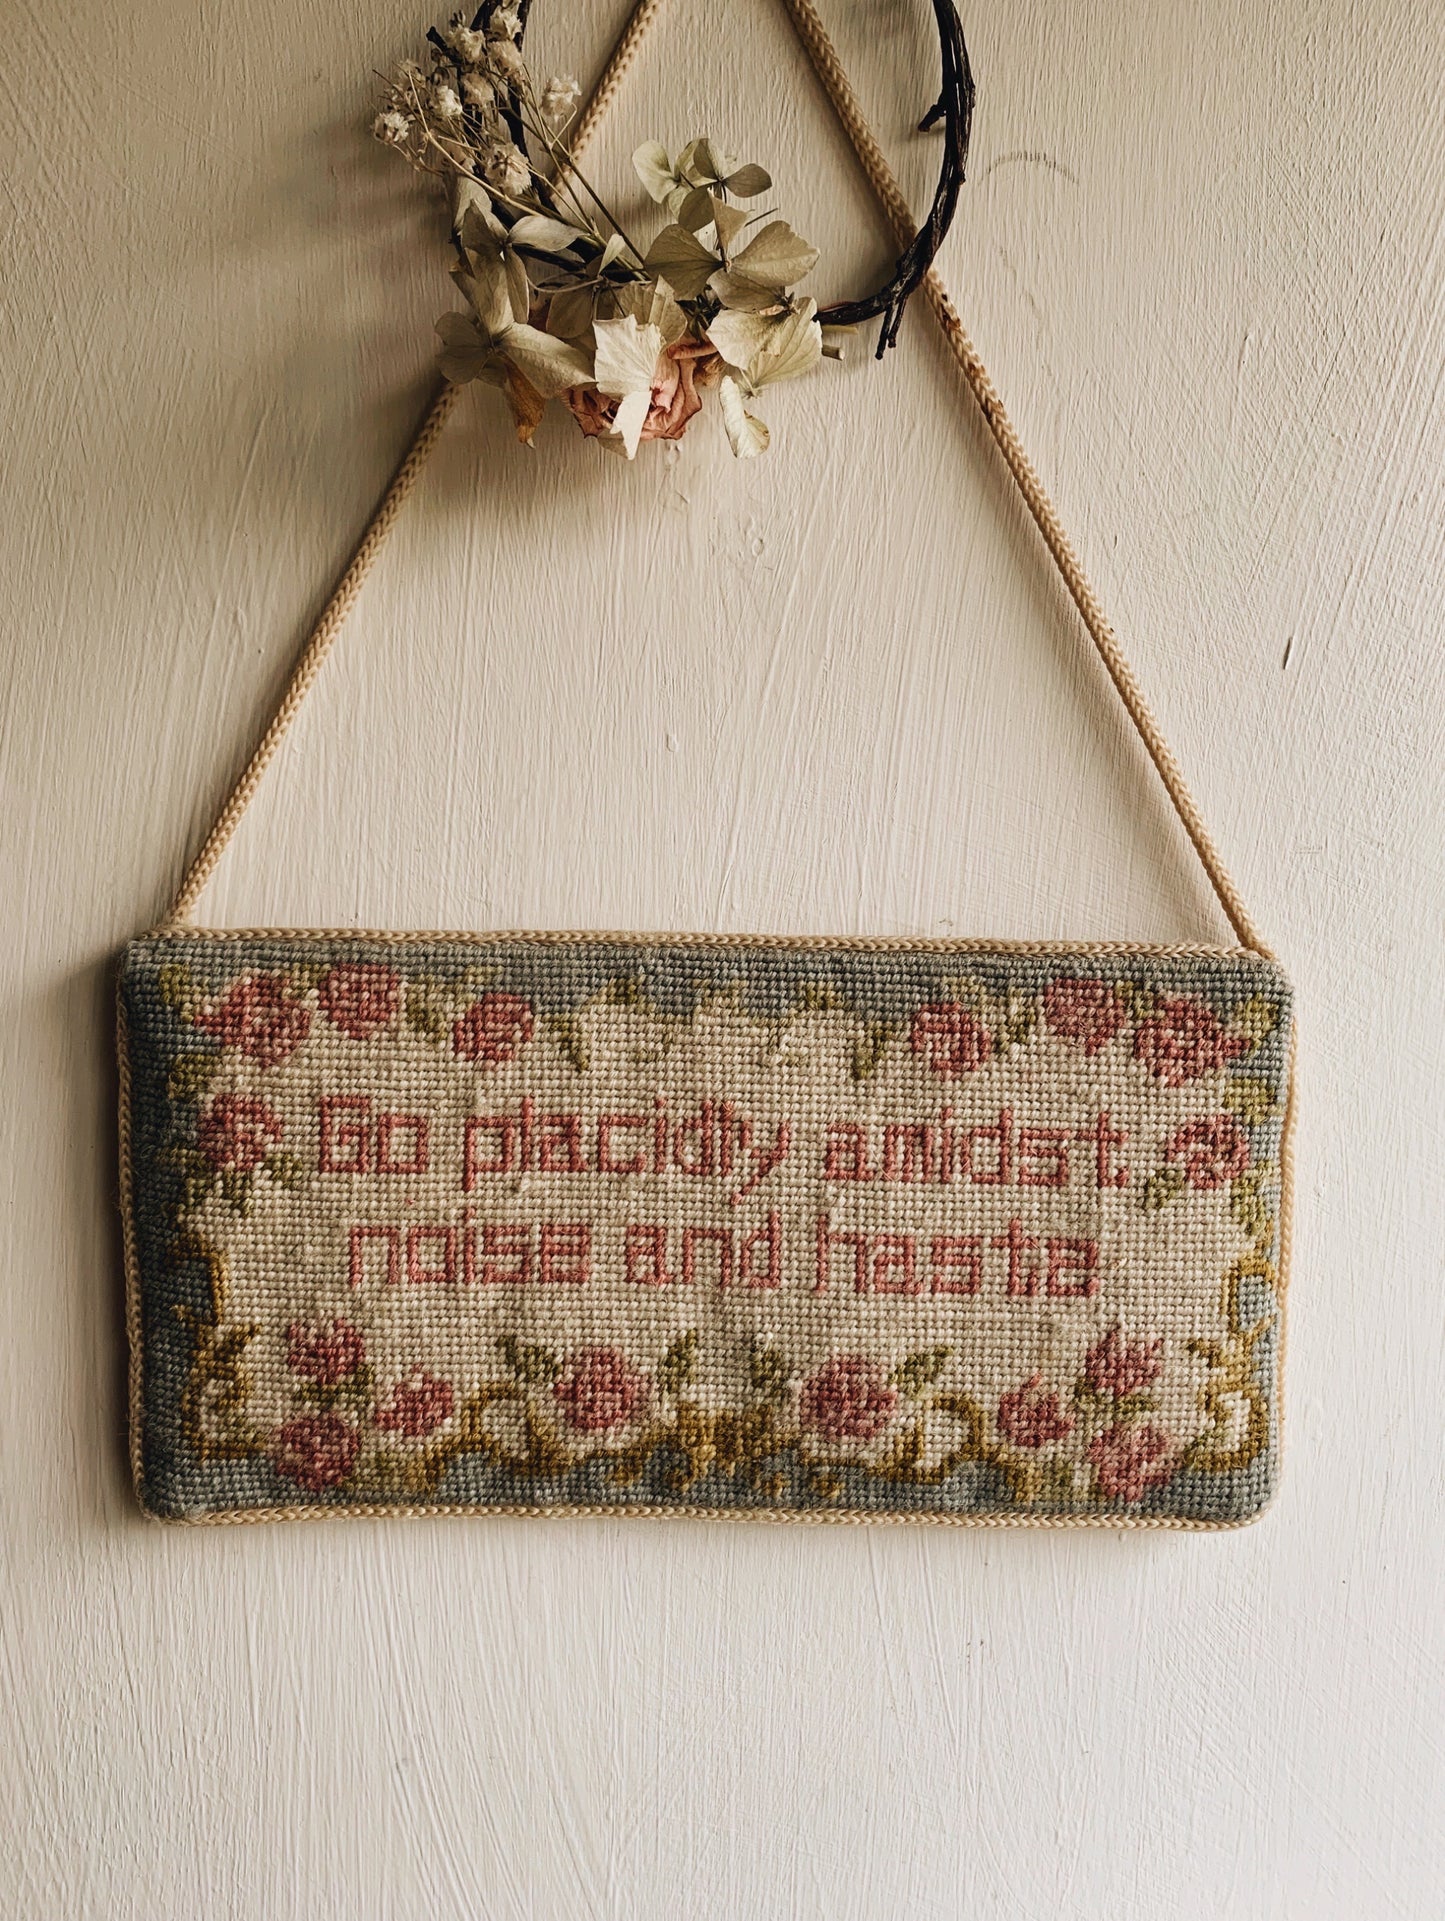 Vintage Tapestry Hanging ~  go placidly admits noise and haste